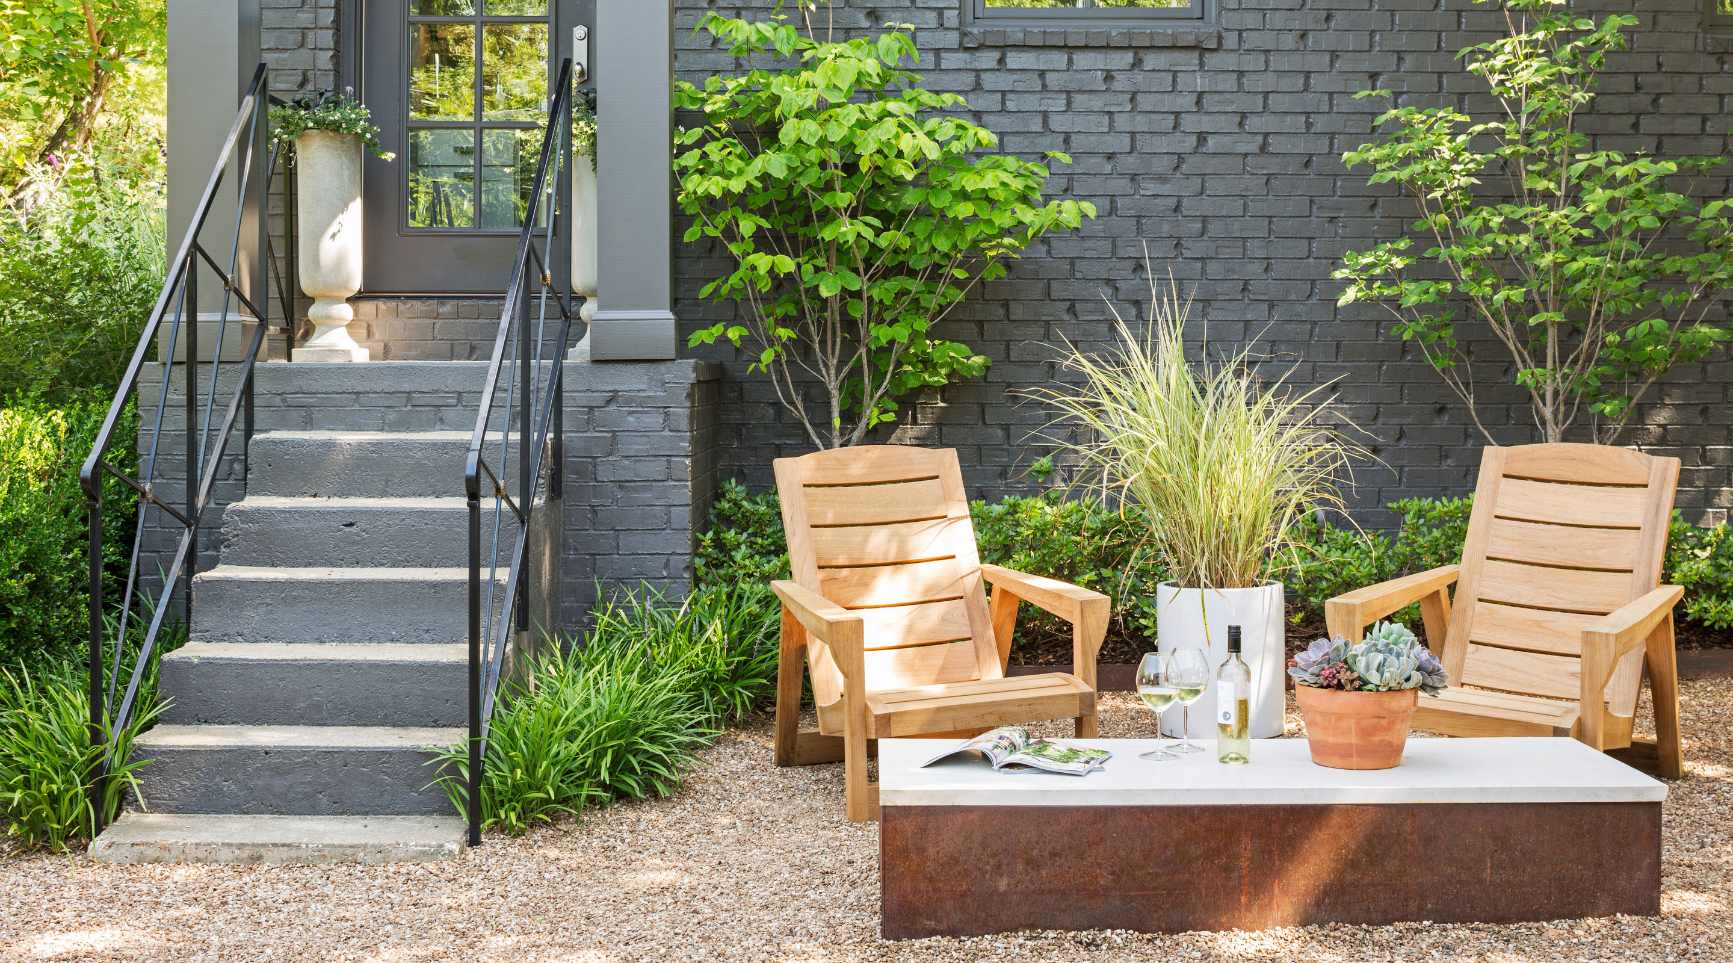 How To Decorate An Outdoor Patio